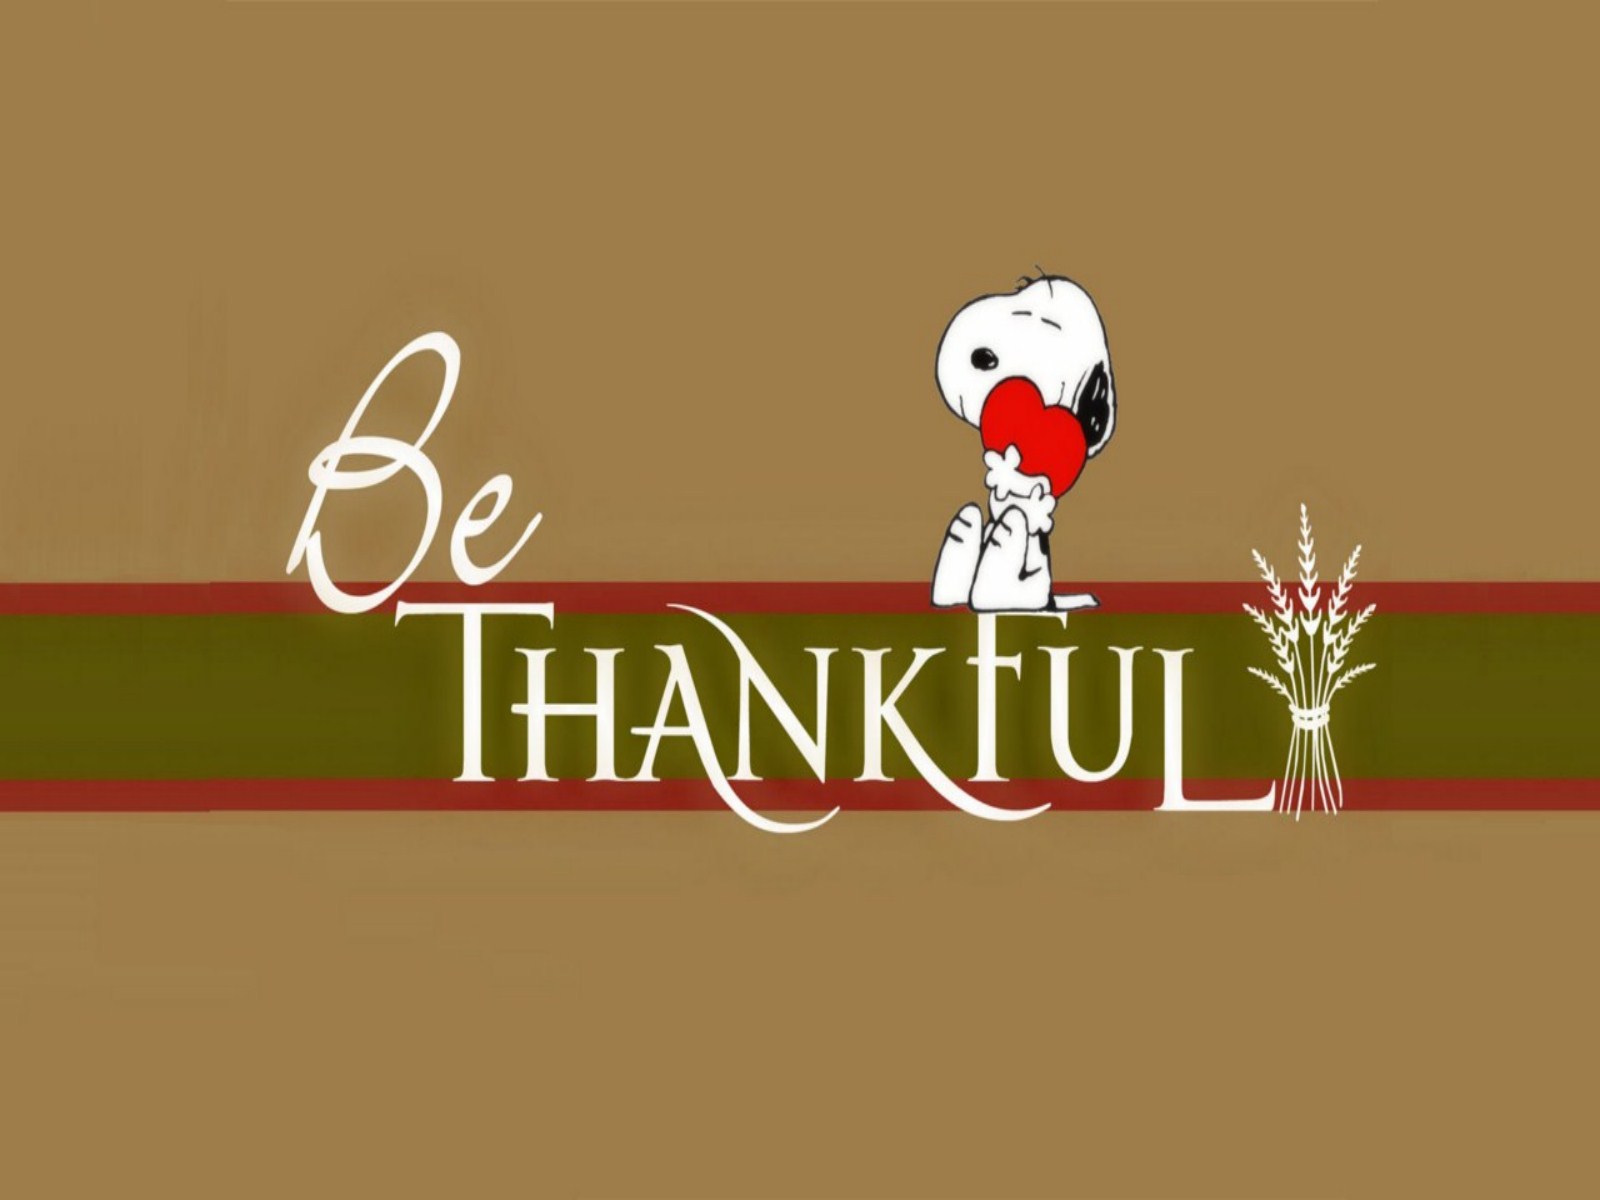 Happy Thanksgiving Image Amp Pictures Becuo